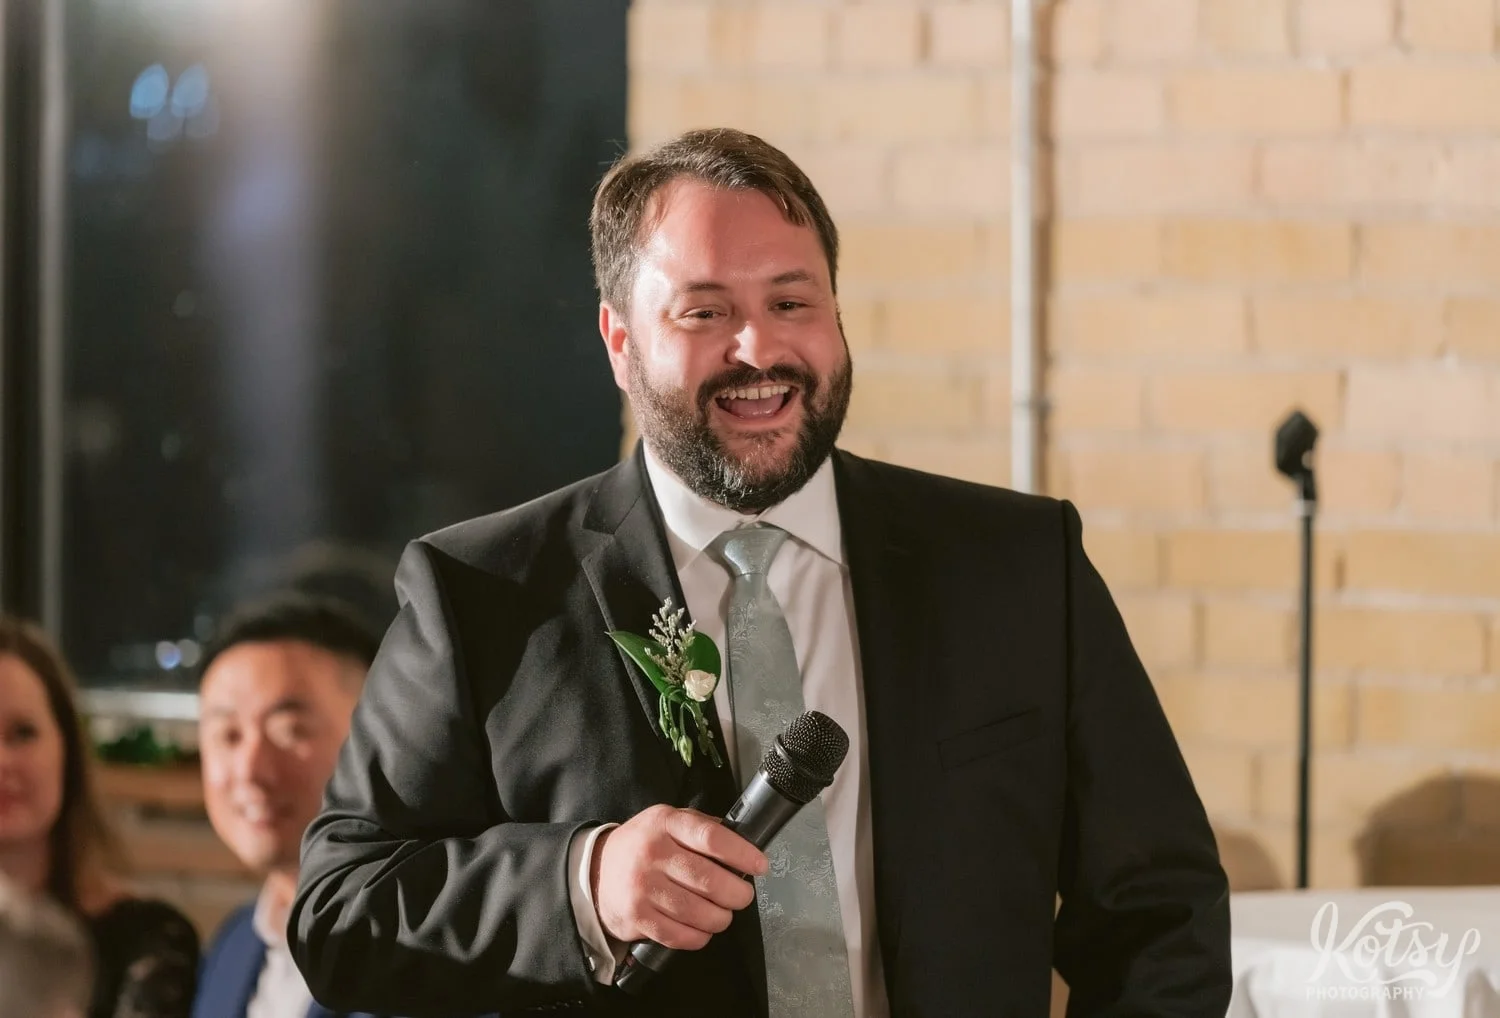 A man in a black suit and green tie enjoys a laugh while holding a microphone during a Second Floor Events wedding reception in Toronto, Canada.